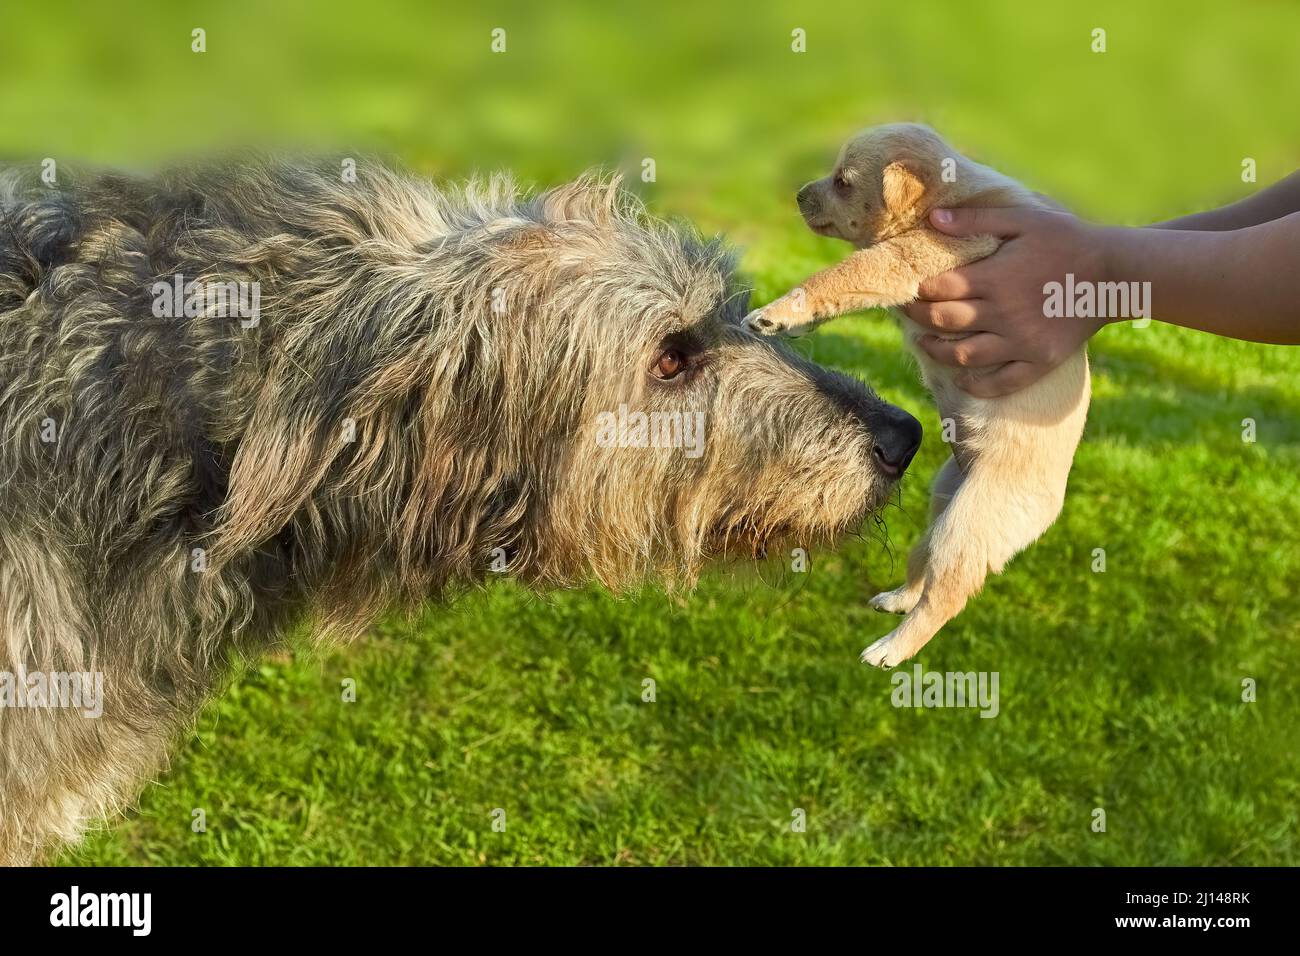 Acquaintance of a large gray Irish wolfhound and a small puppy Stock Photo